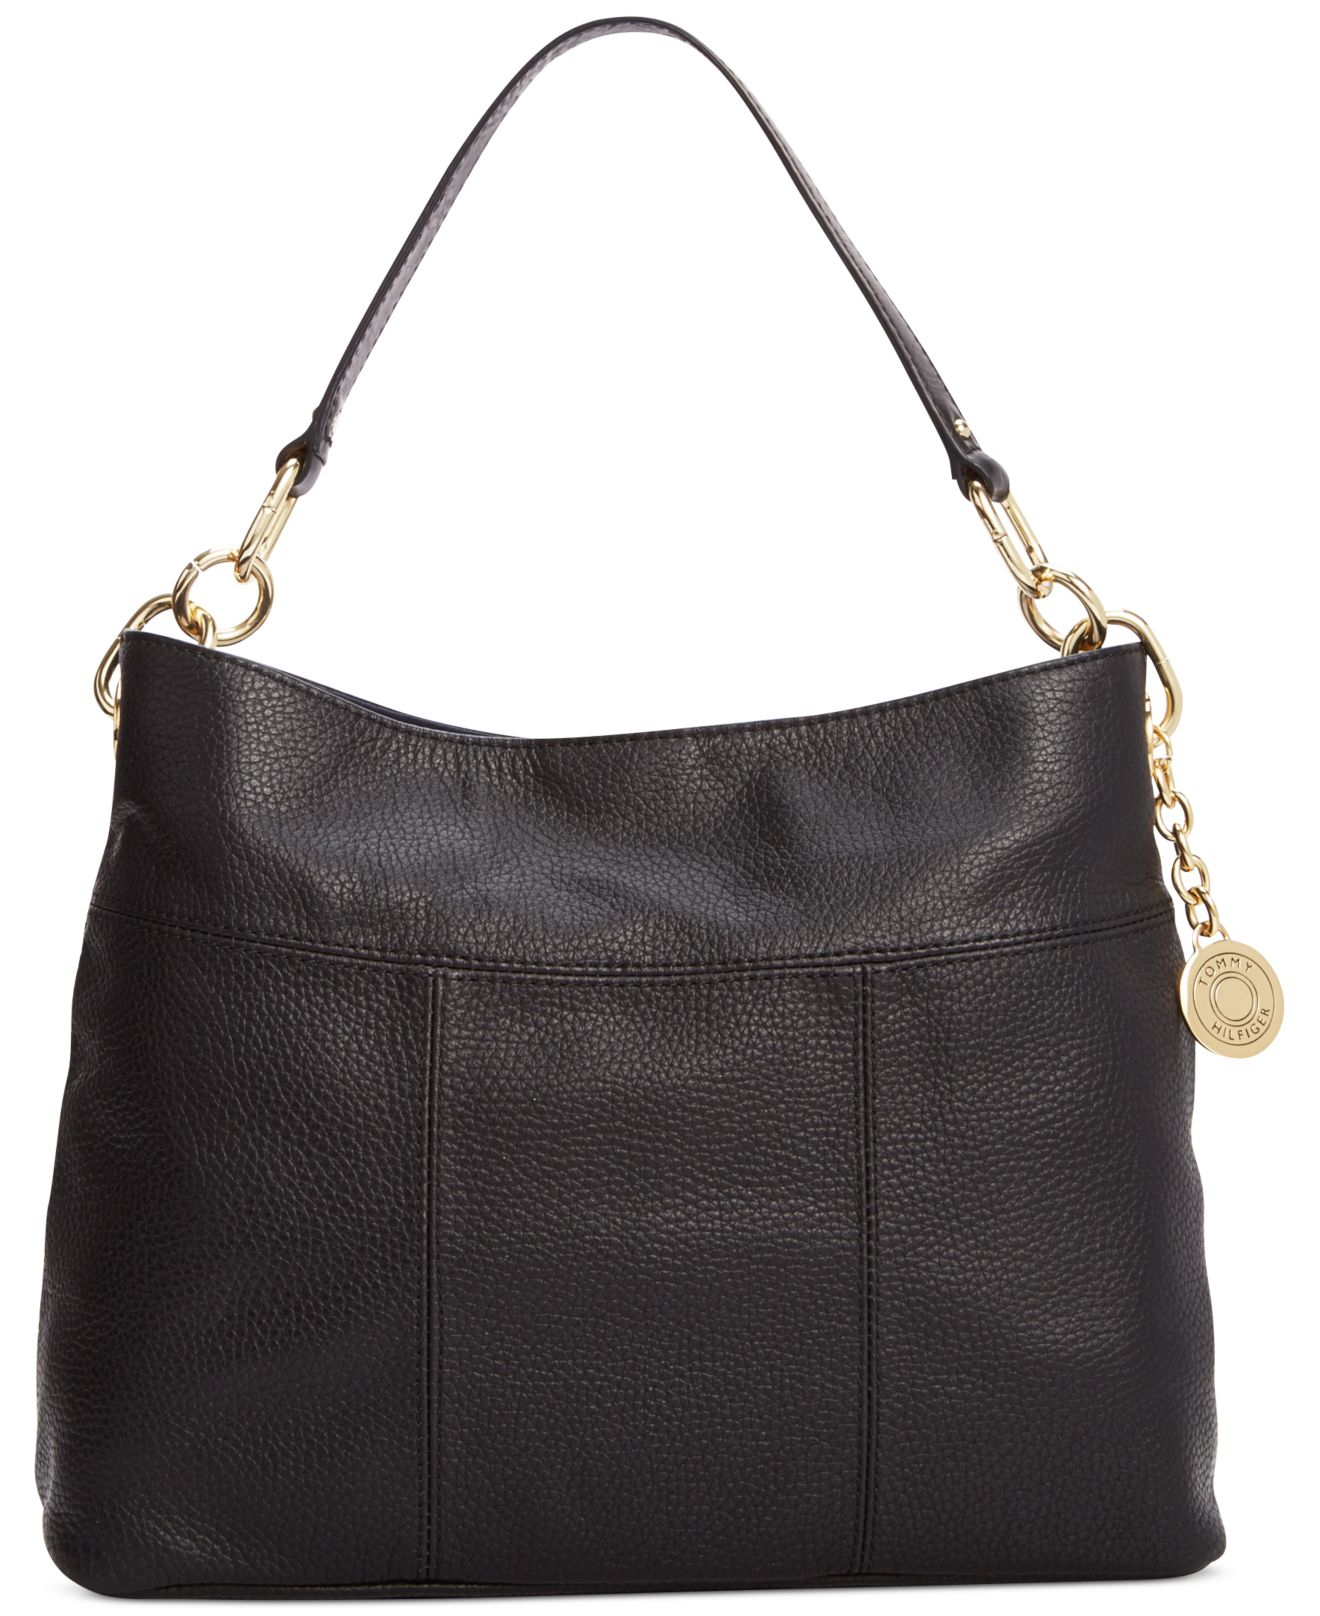 Tommy hilfiger Th Signature Leather Small Hobo in Black | Lyst